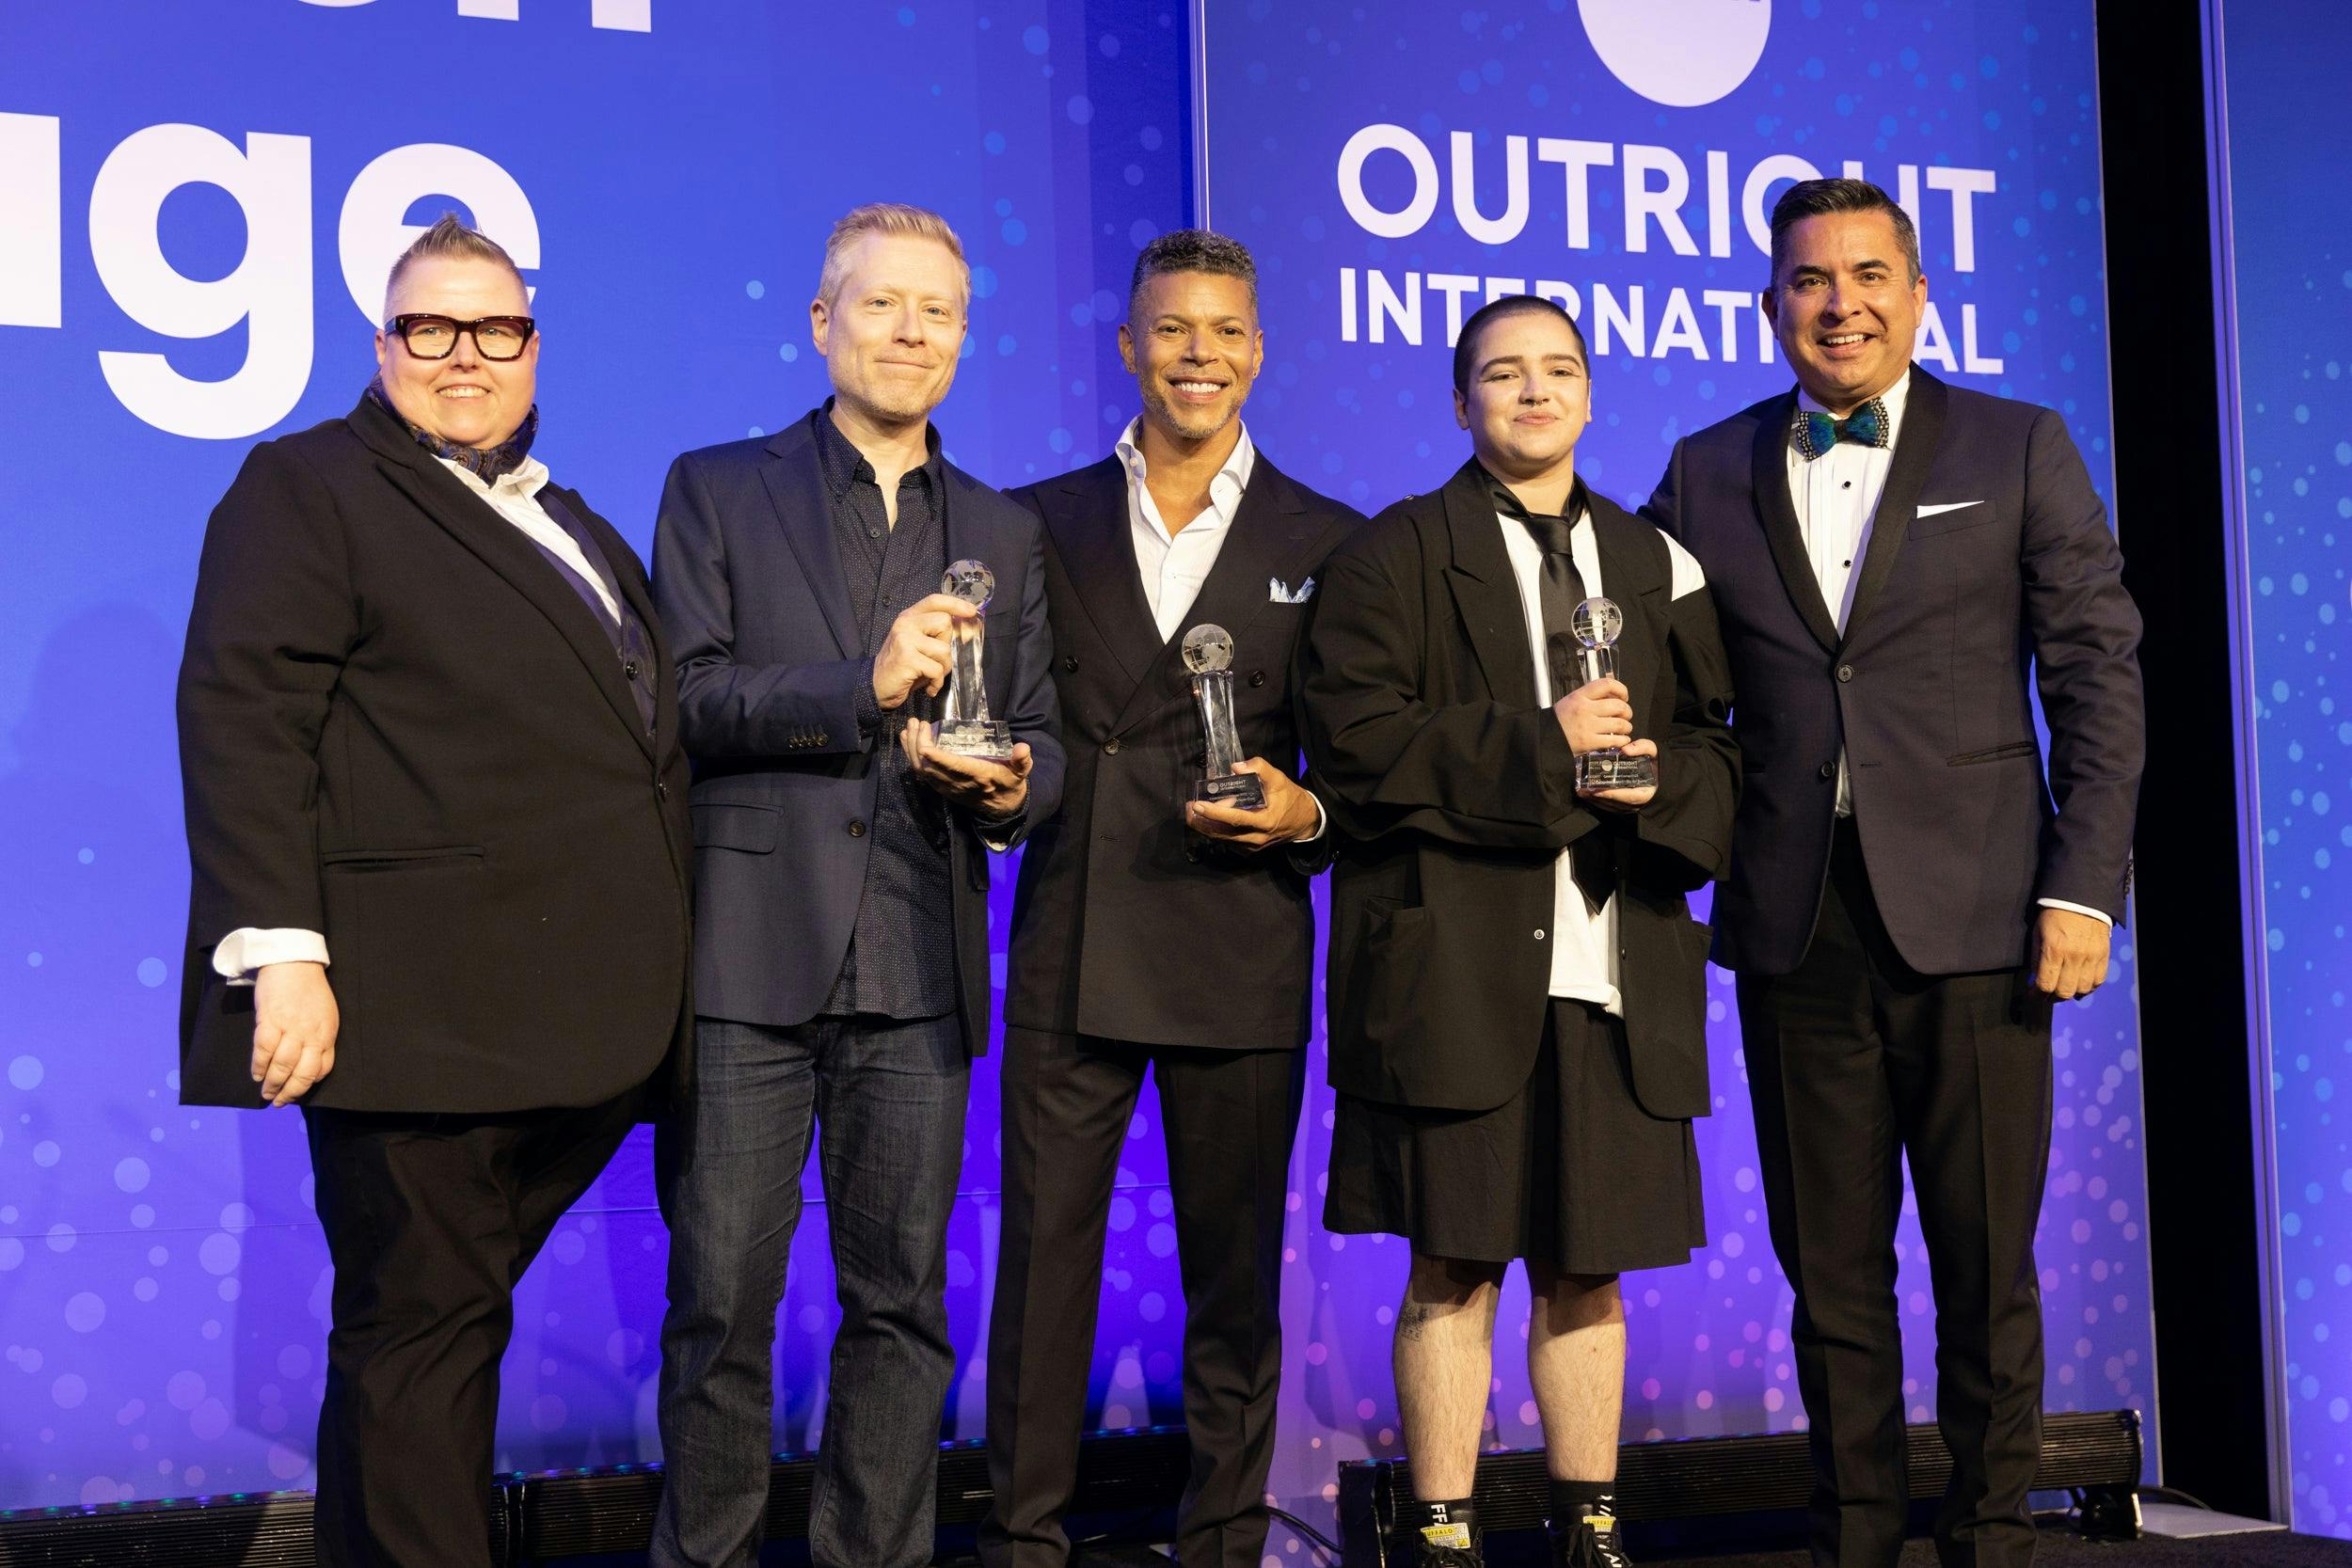 27th Celebration of Courage Awards and Gala - Star Trek: Discovery's Anthony Rapp, Wilson Cruz, and Blu del Barrio honored with this year's Outspoken Award